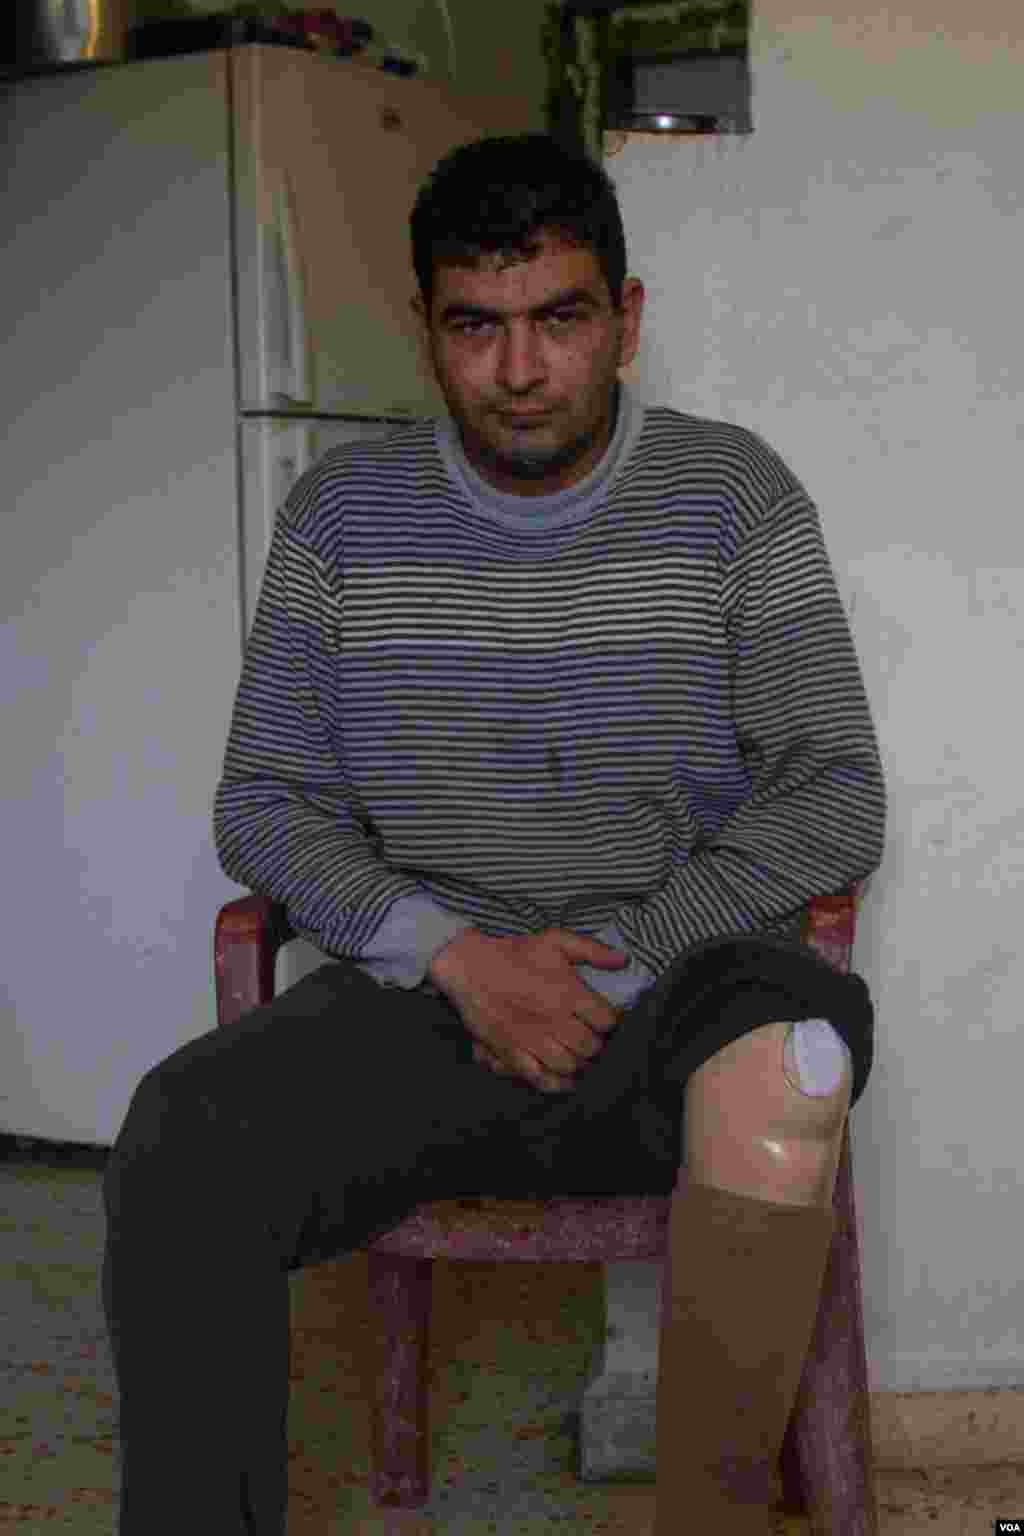 Ahmad lost his leg in a car accident back in Syria, John Owens/VOA.